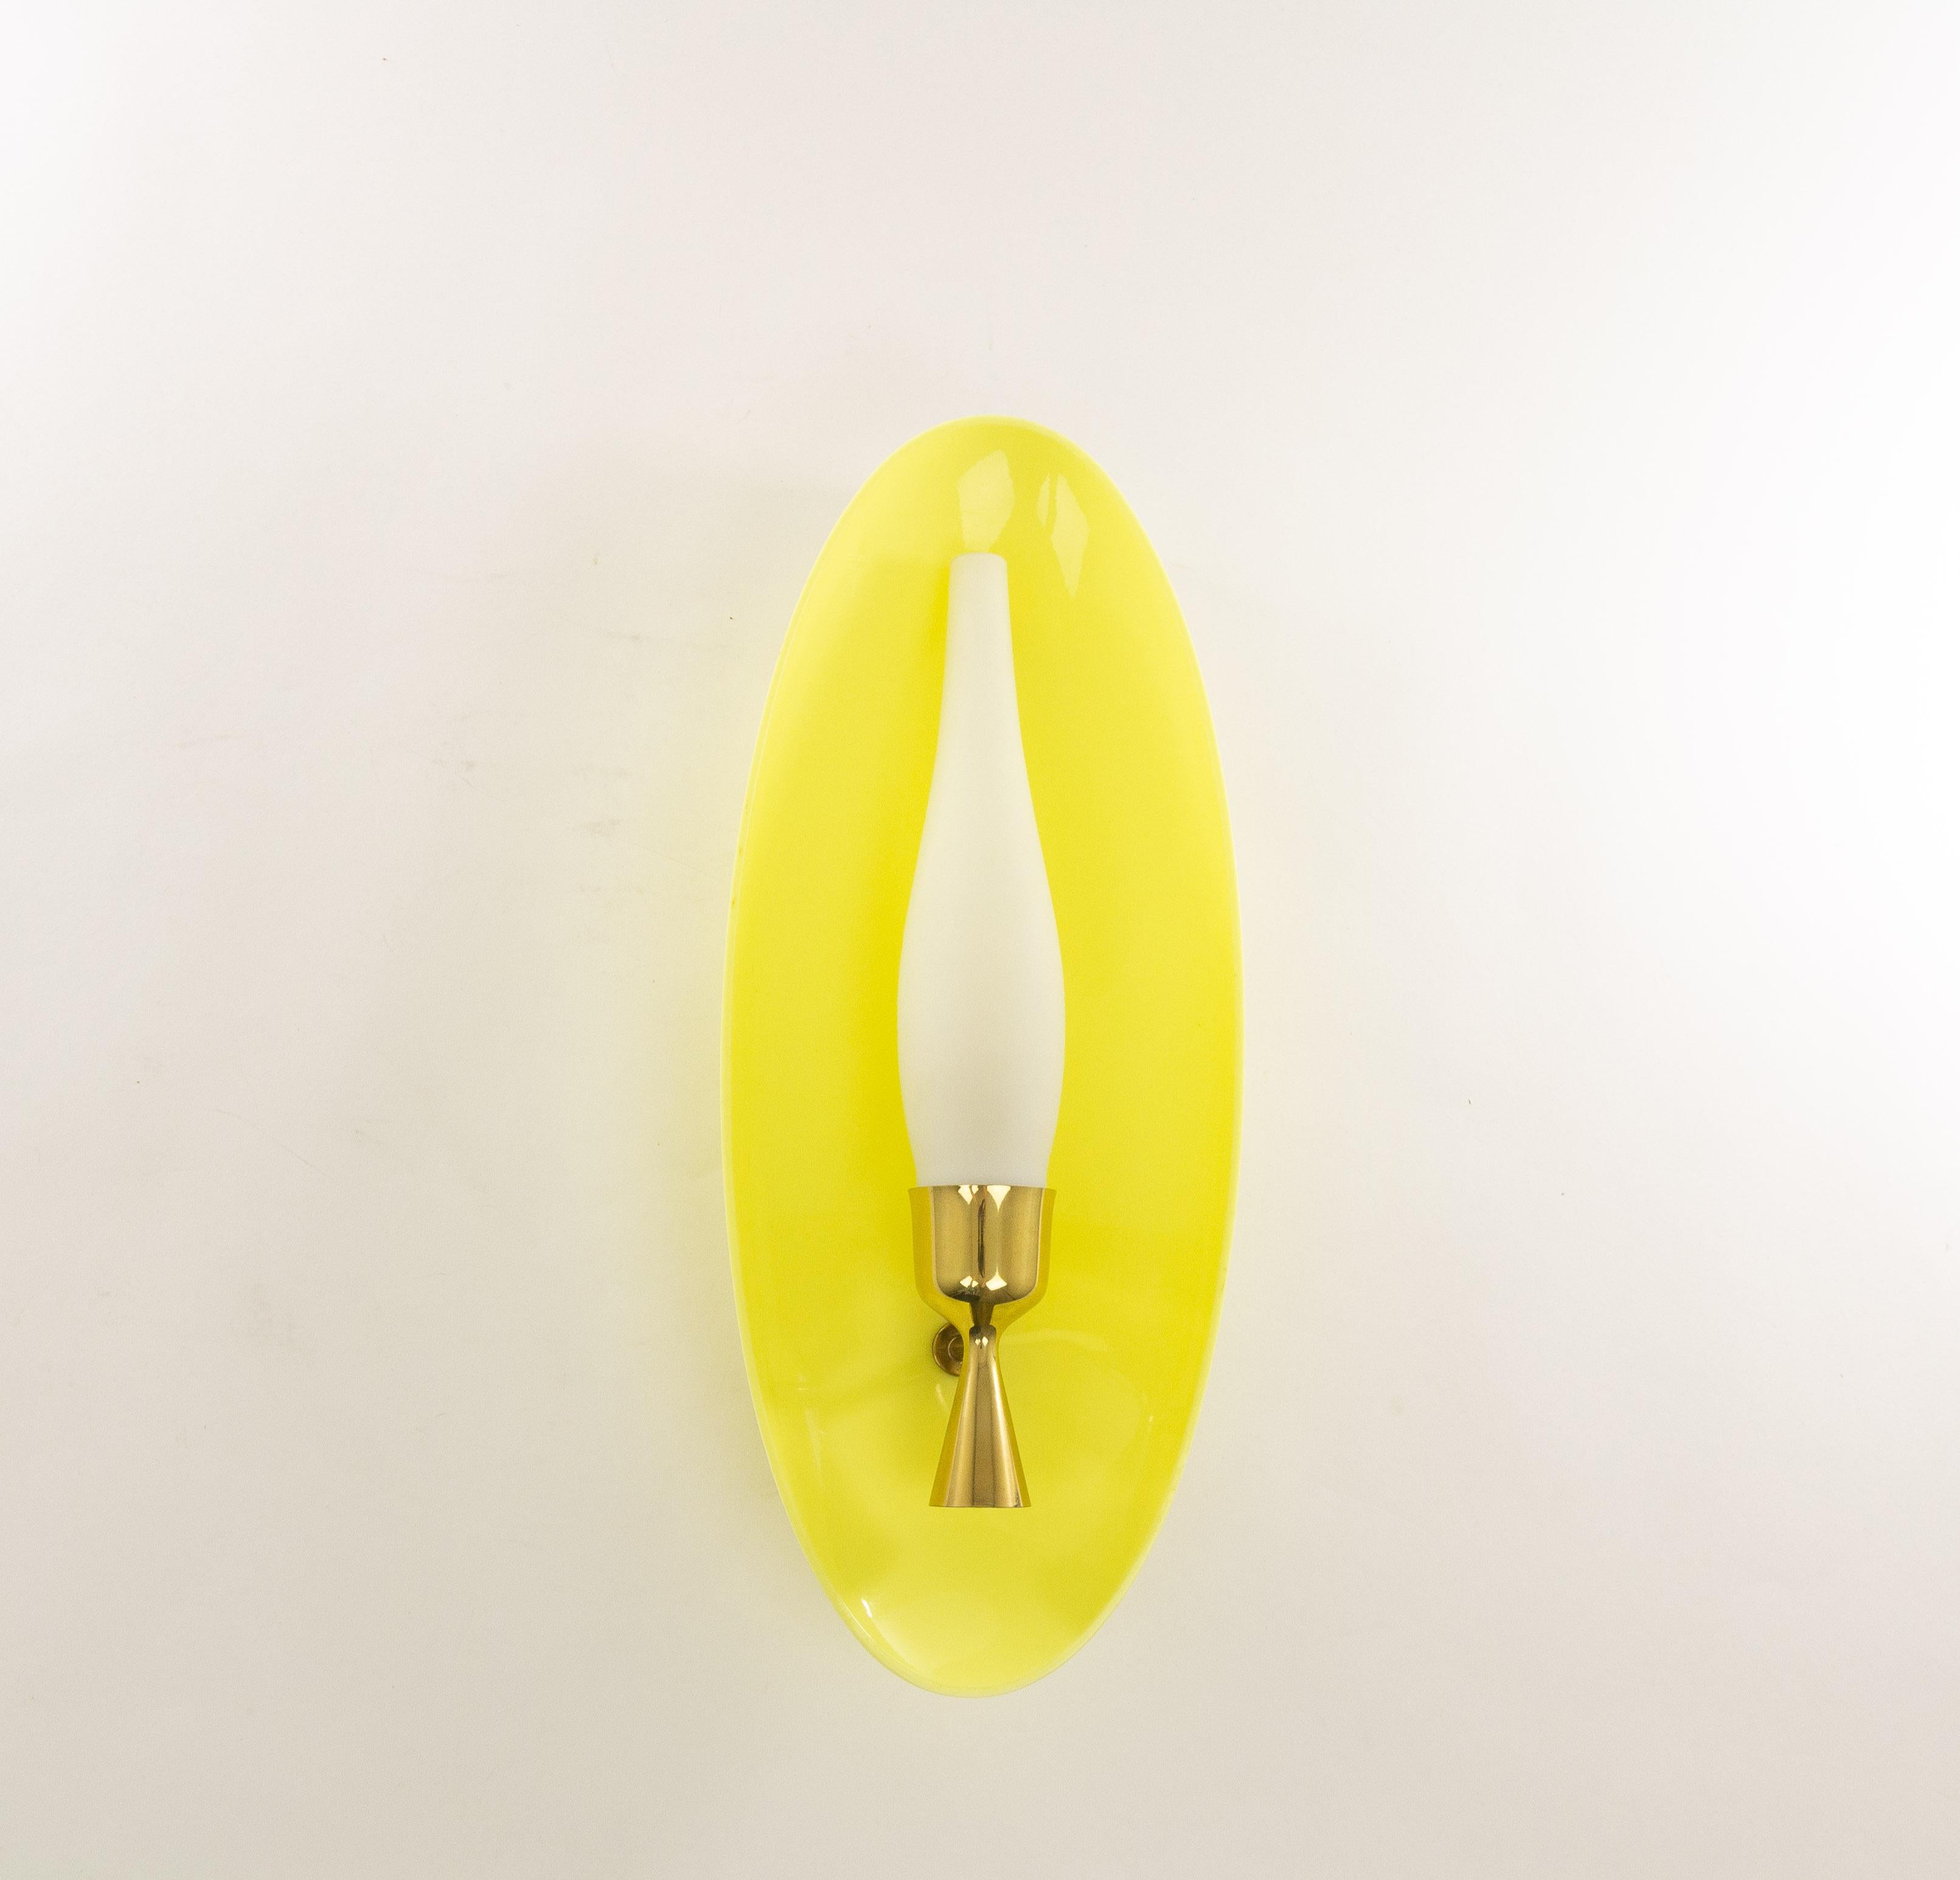 Wall fixture, No. 12645, designed by Angelo Lelii and produced by Arredoluce in 1957.

This wall lamp consists of a striking yellow plexiglas reflector in combination with a duplex white opal candle-shaped glass shade in a brass holder.

The